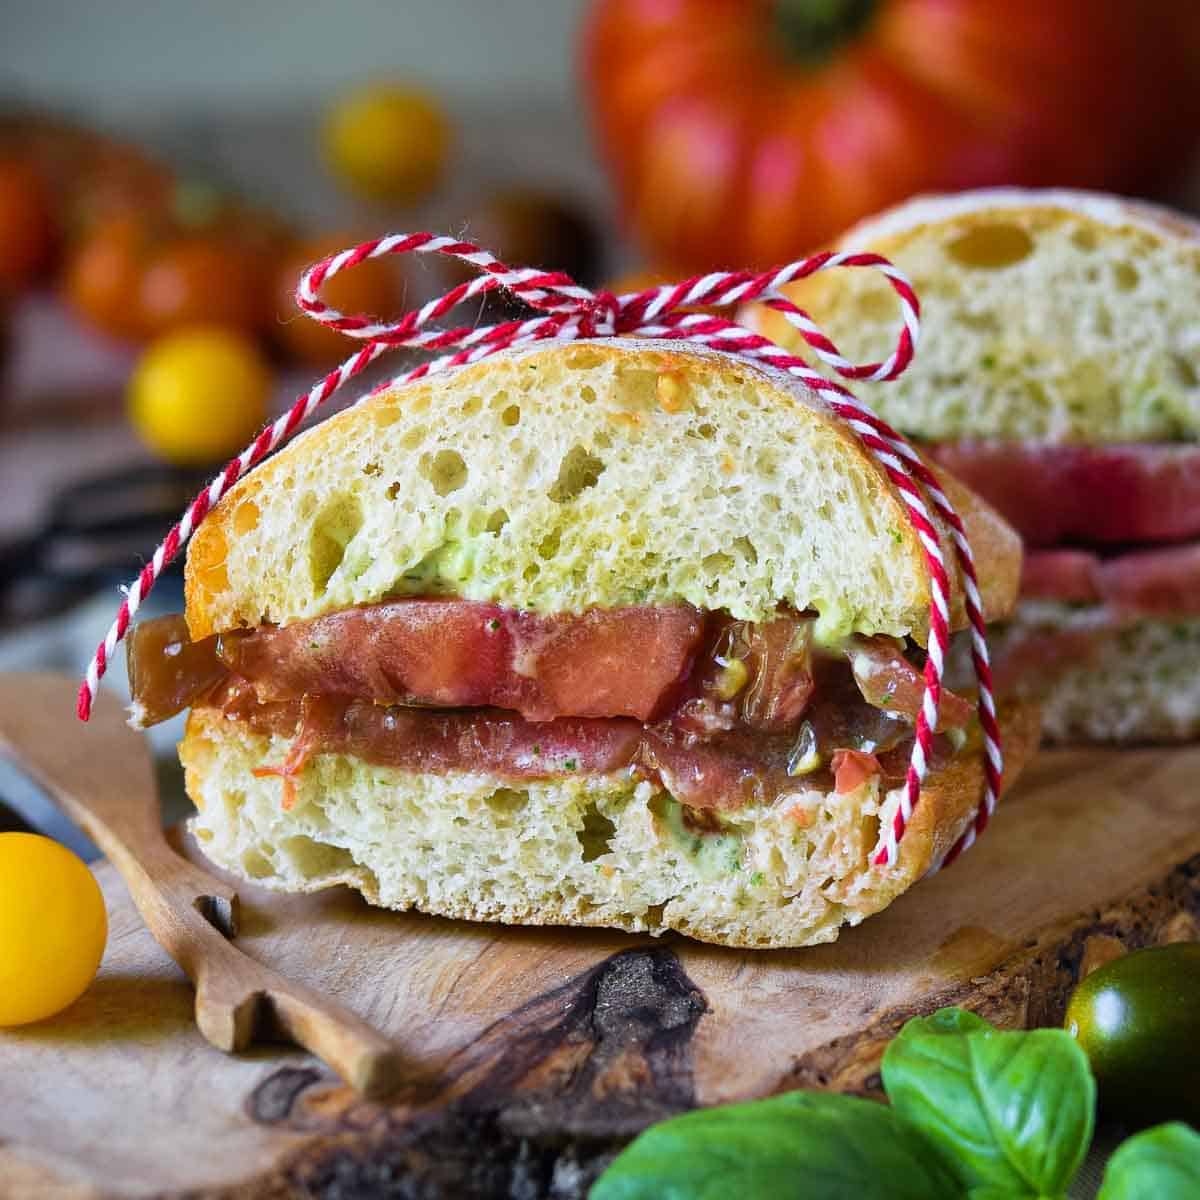 Tomato sandwich on a wood board tied up with a string.